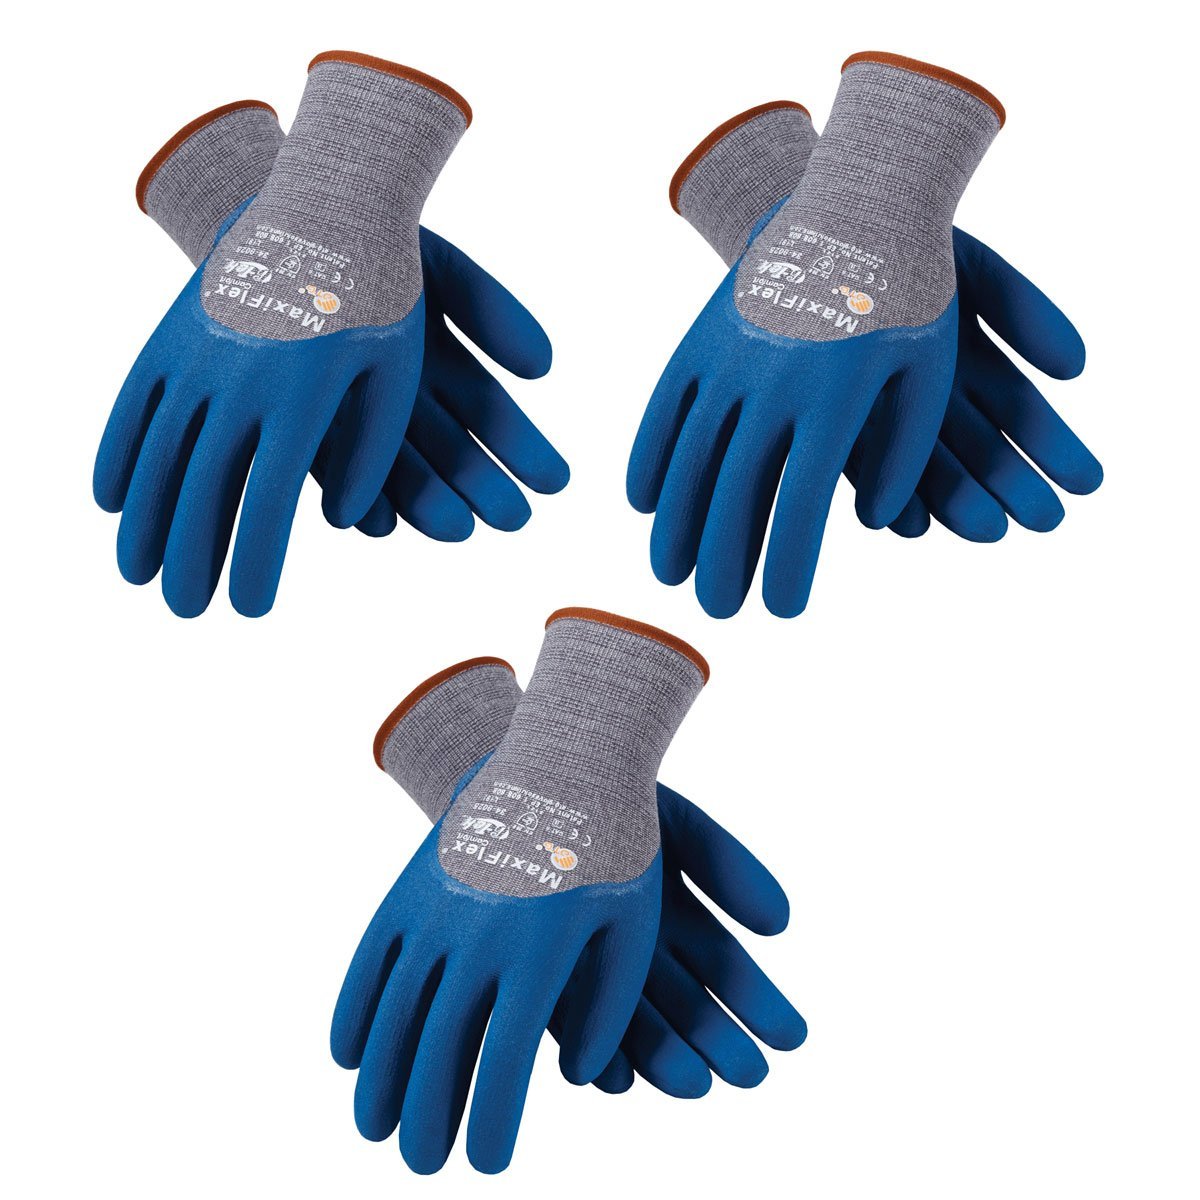 ATG 3 MaxiFlex Endurance 34-844 Seamless Knit Nylon Work Glove with Nitrile Grip on Palm & Fingers, Sizes Small to X-Large (Large), Black and gray (34-844 - LARGE 3/PACK) Walmart.com